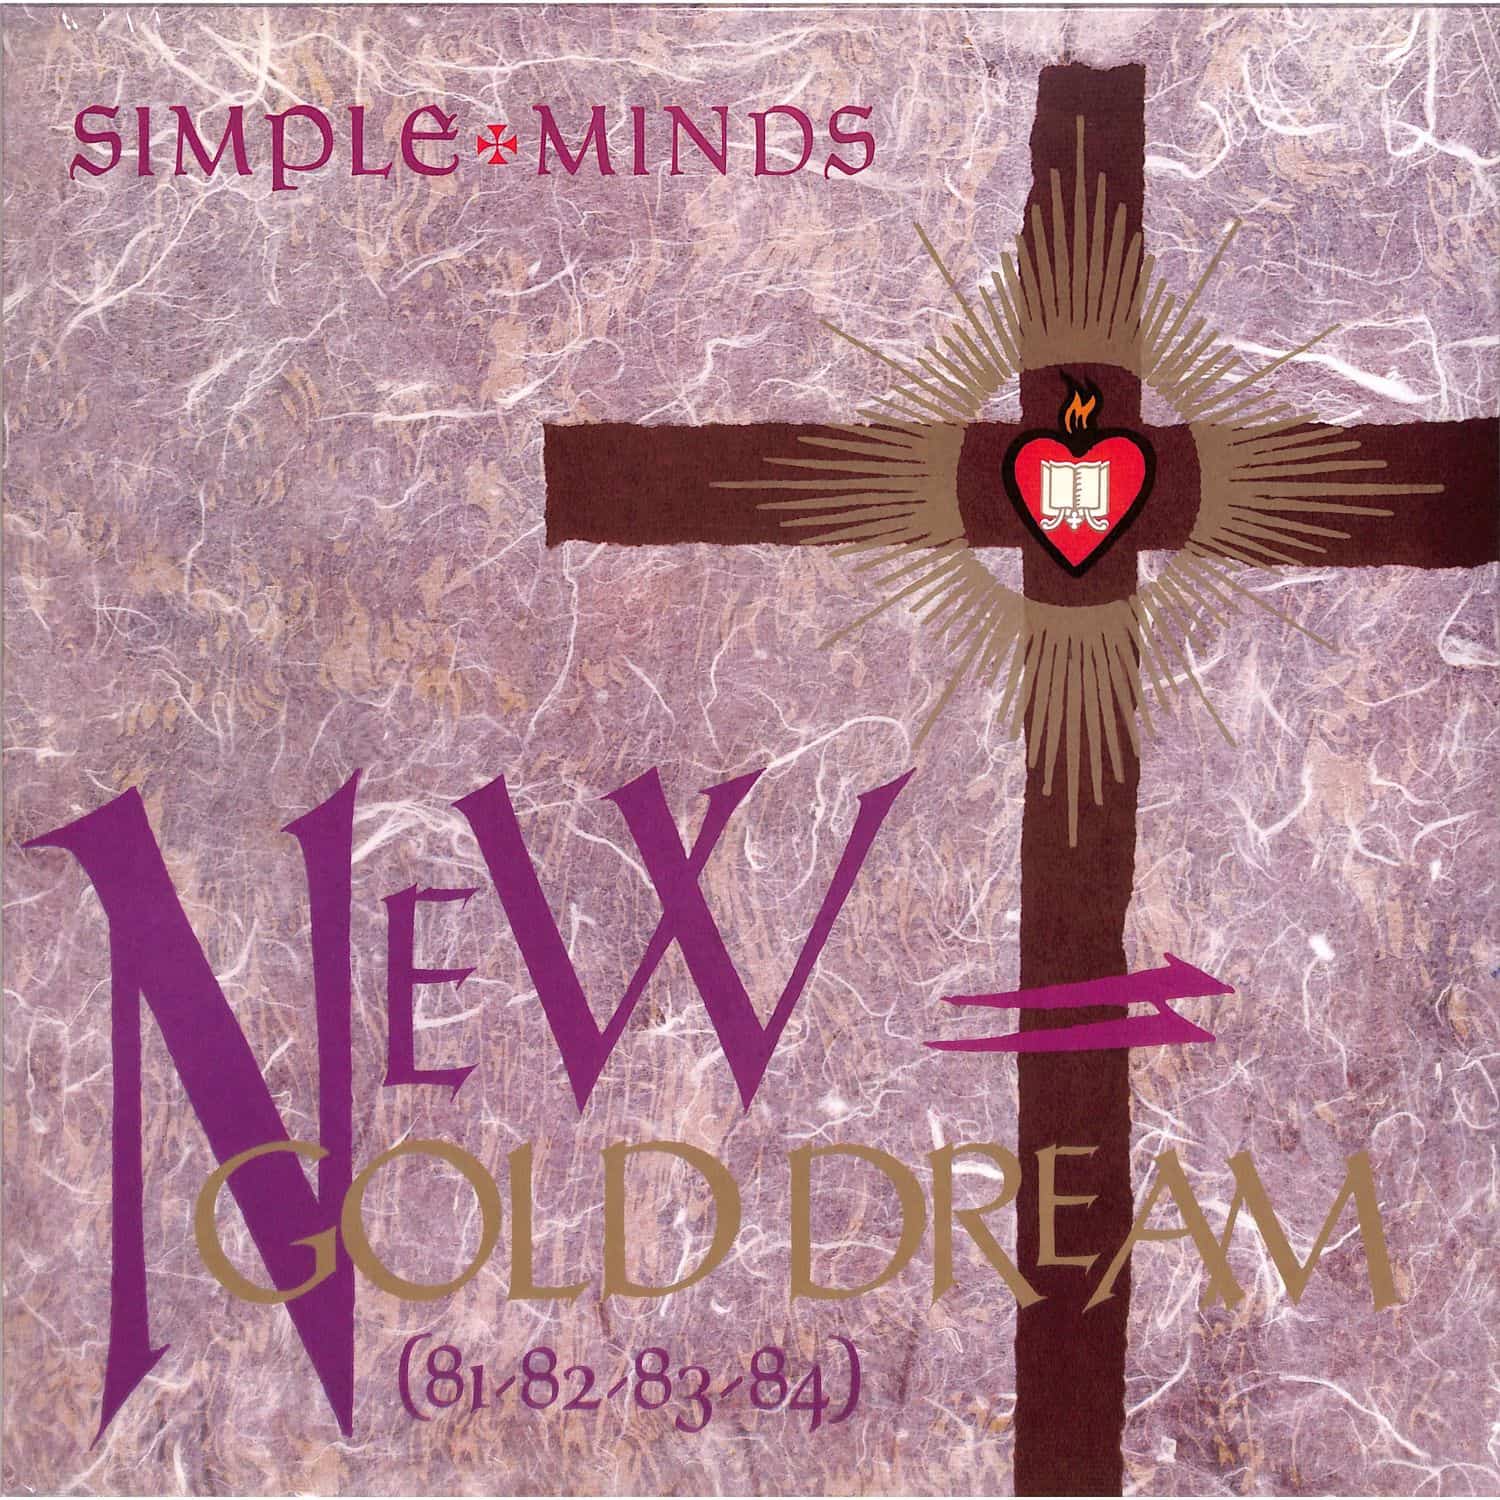 Simple Minds - NEW GOLD DREAM 